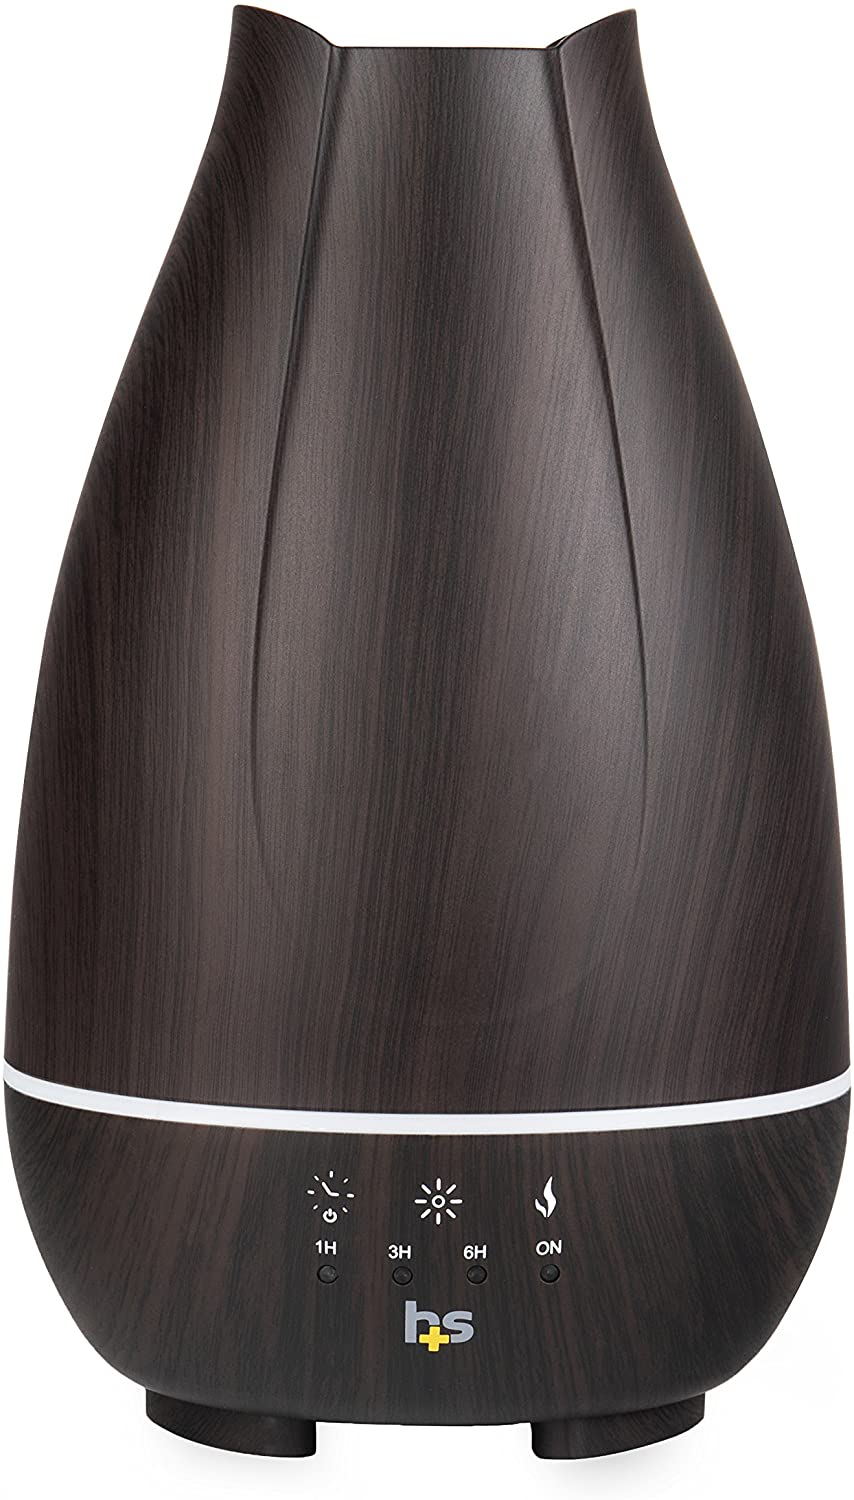 HealthSmart Humidifier and Aromatherapy Diffuser (Brown) $8 + Free Shipping w/ Prime or on orders over $25